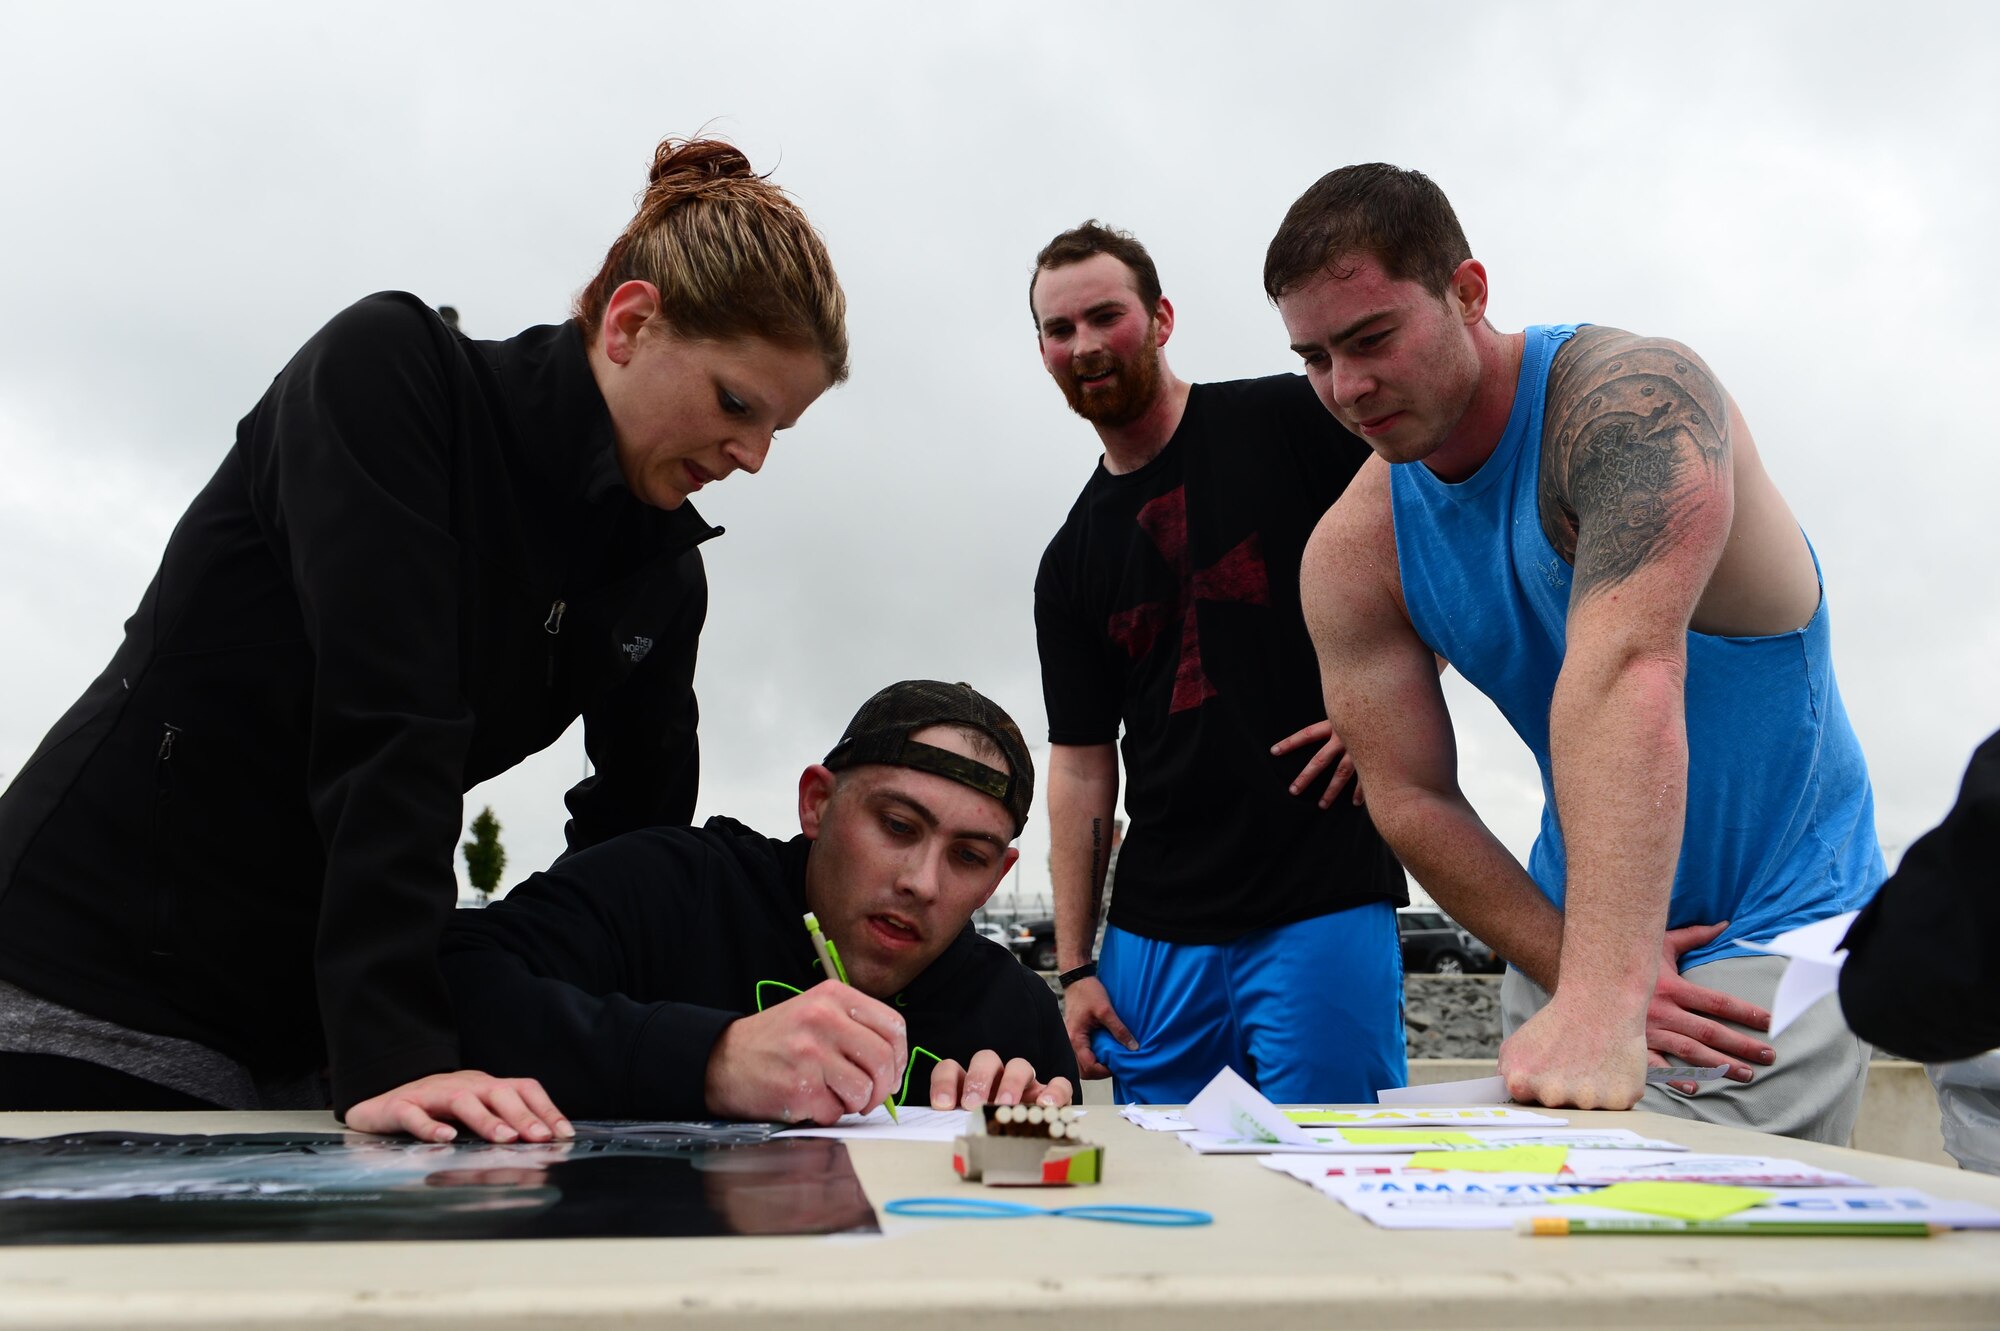 52nd Fighter Wing Airmen compete in a challenge as part of The Amazing Be Ready Race recognizing National Preparedness Month at Spangdahlem Air Base, Germany, Sept. 30, 2016. This is the first challenge of it's kind at Spangdahlem to better prepare Airmen for disasters and emergency situations. (U.S. Air Force photo by Senior Airman Joshua R. M. Dewberry)